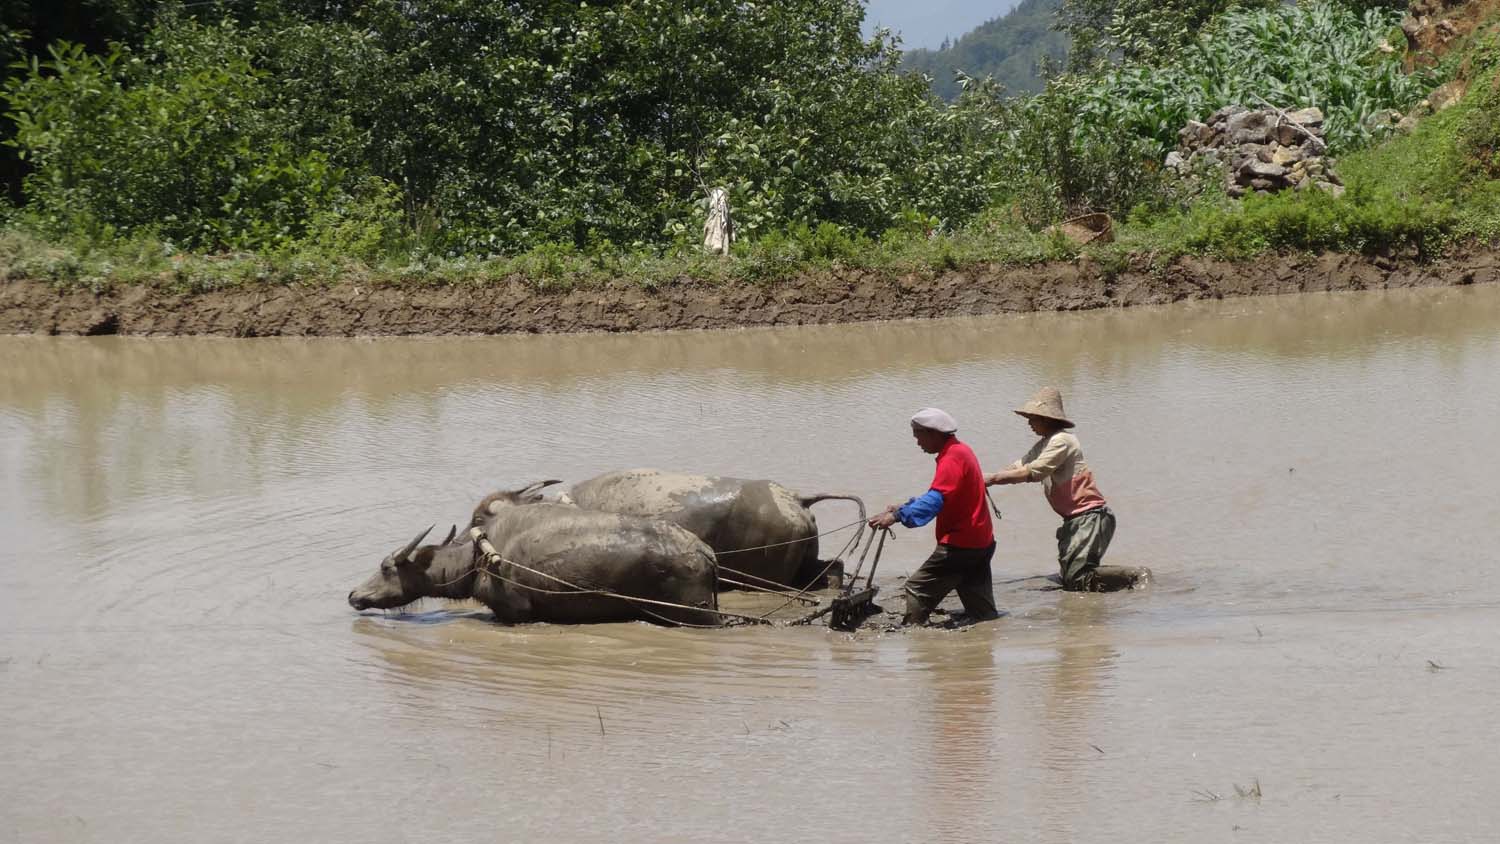 plowing is still done with the help of water buffaloes